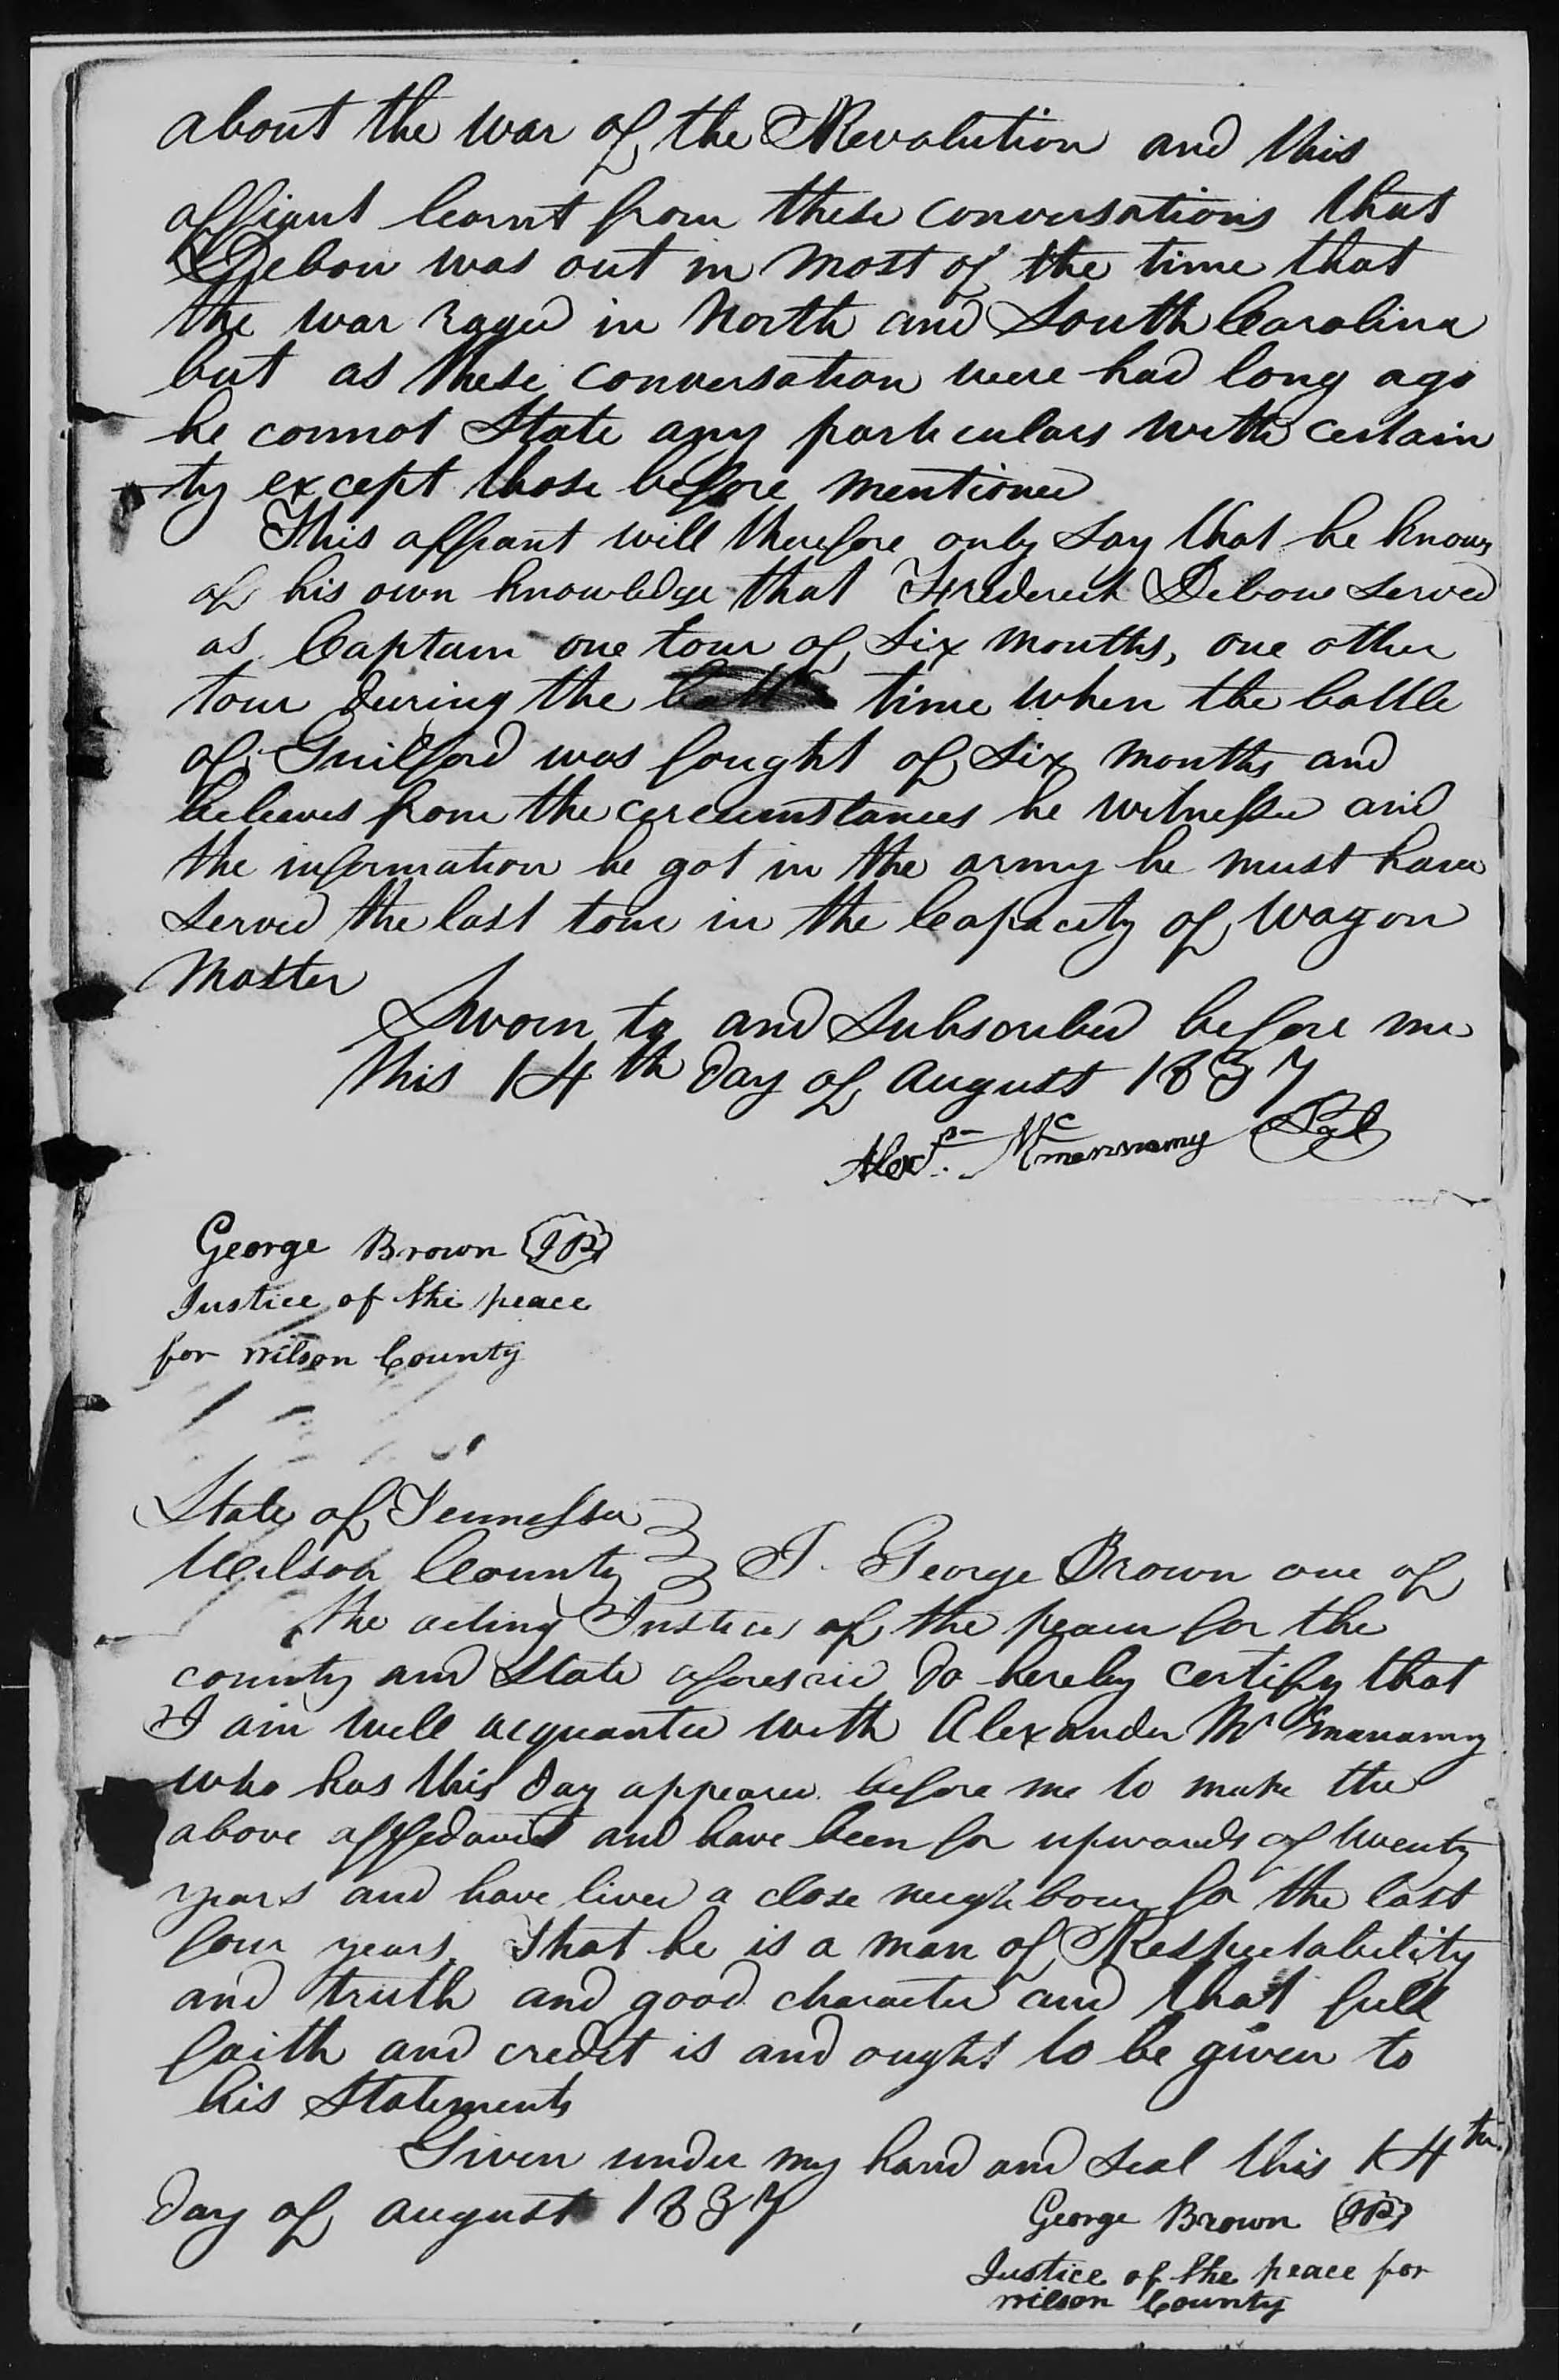 Affidavit of Alexander McMennamy in support of a Pension Claim for Rachel Debow, 14 August 1837, page 3